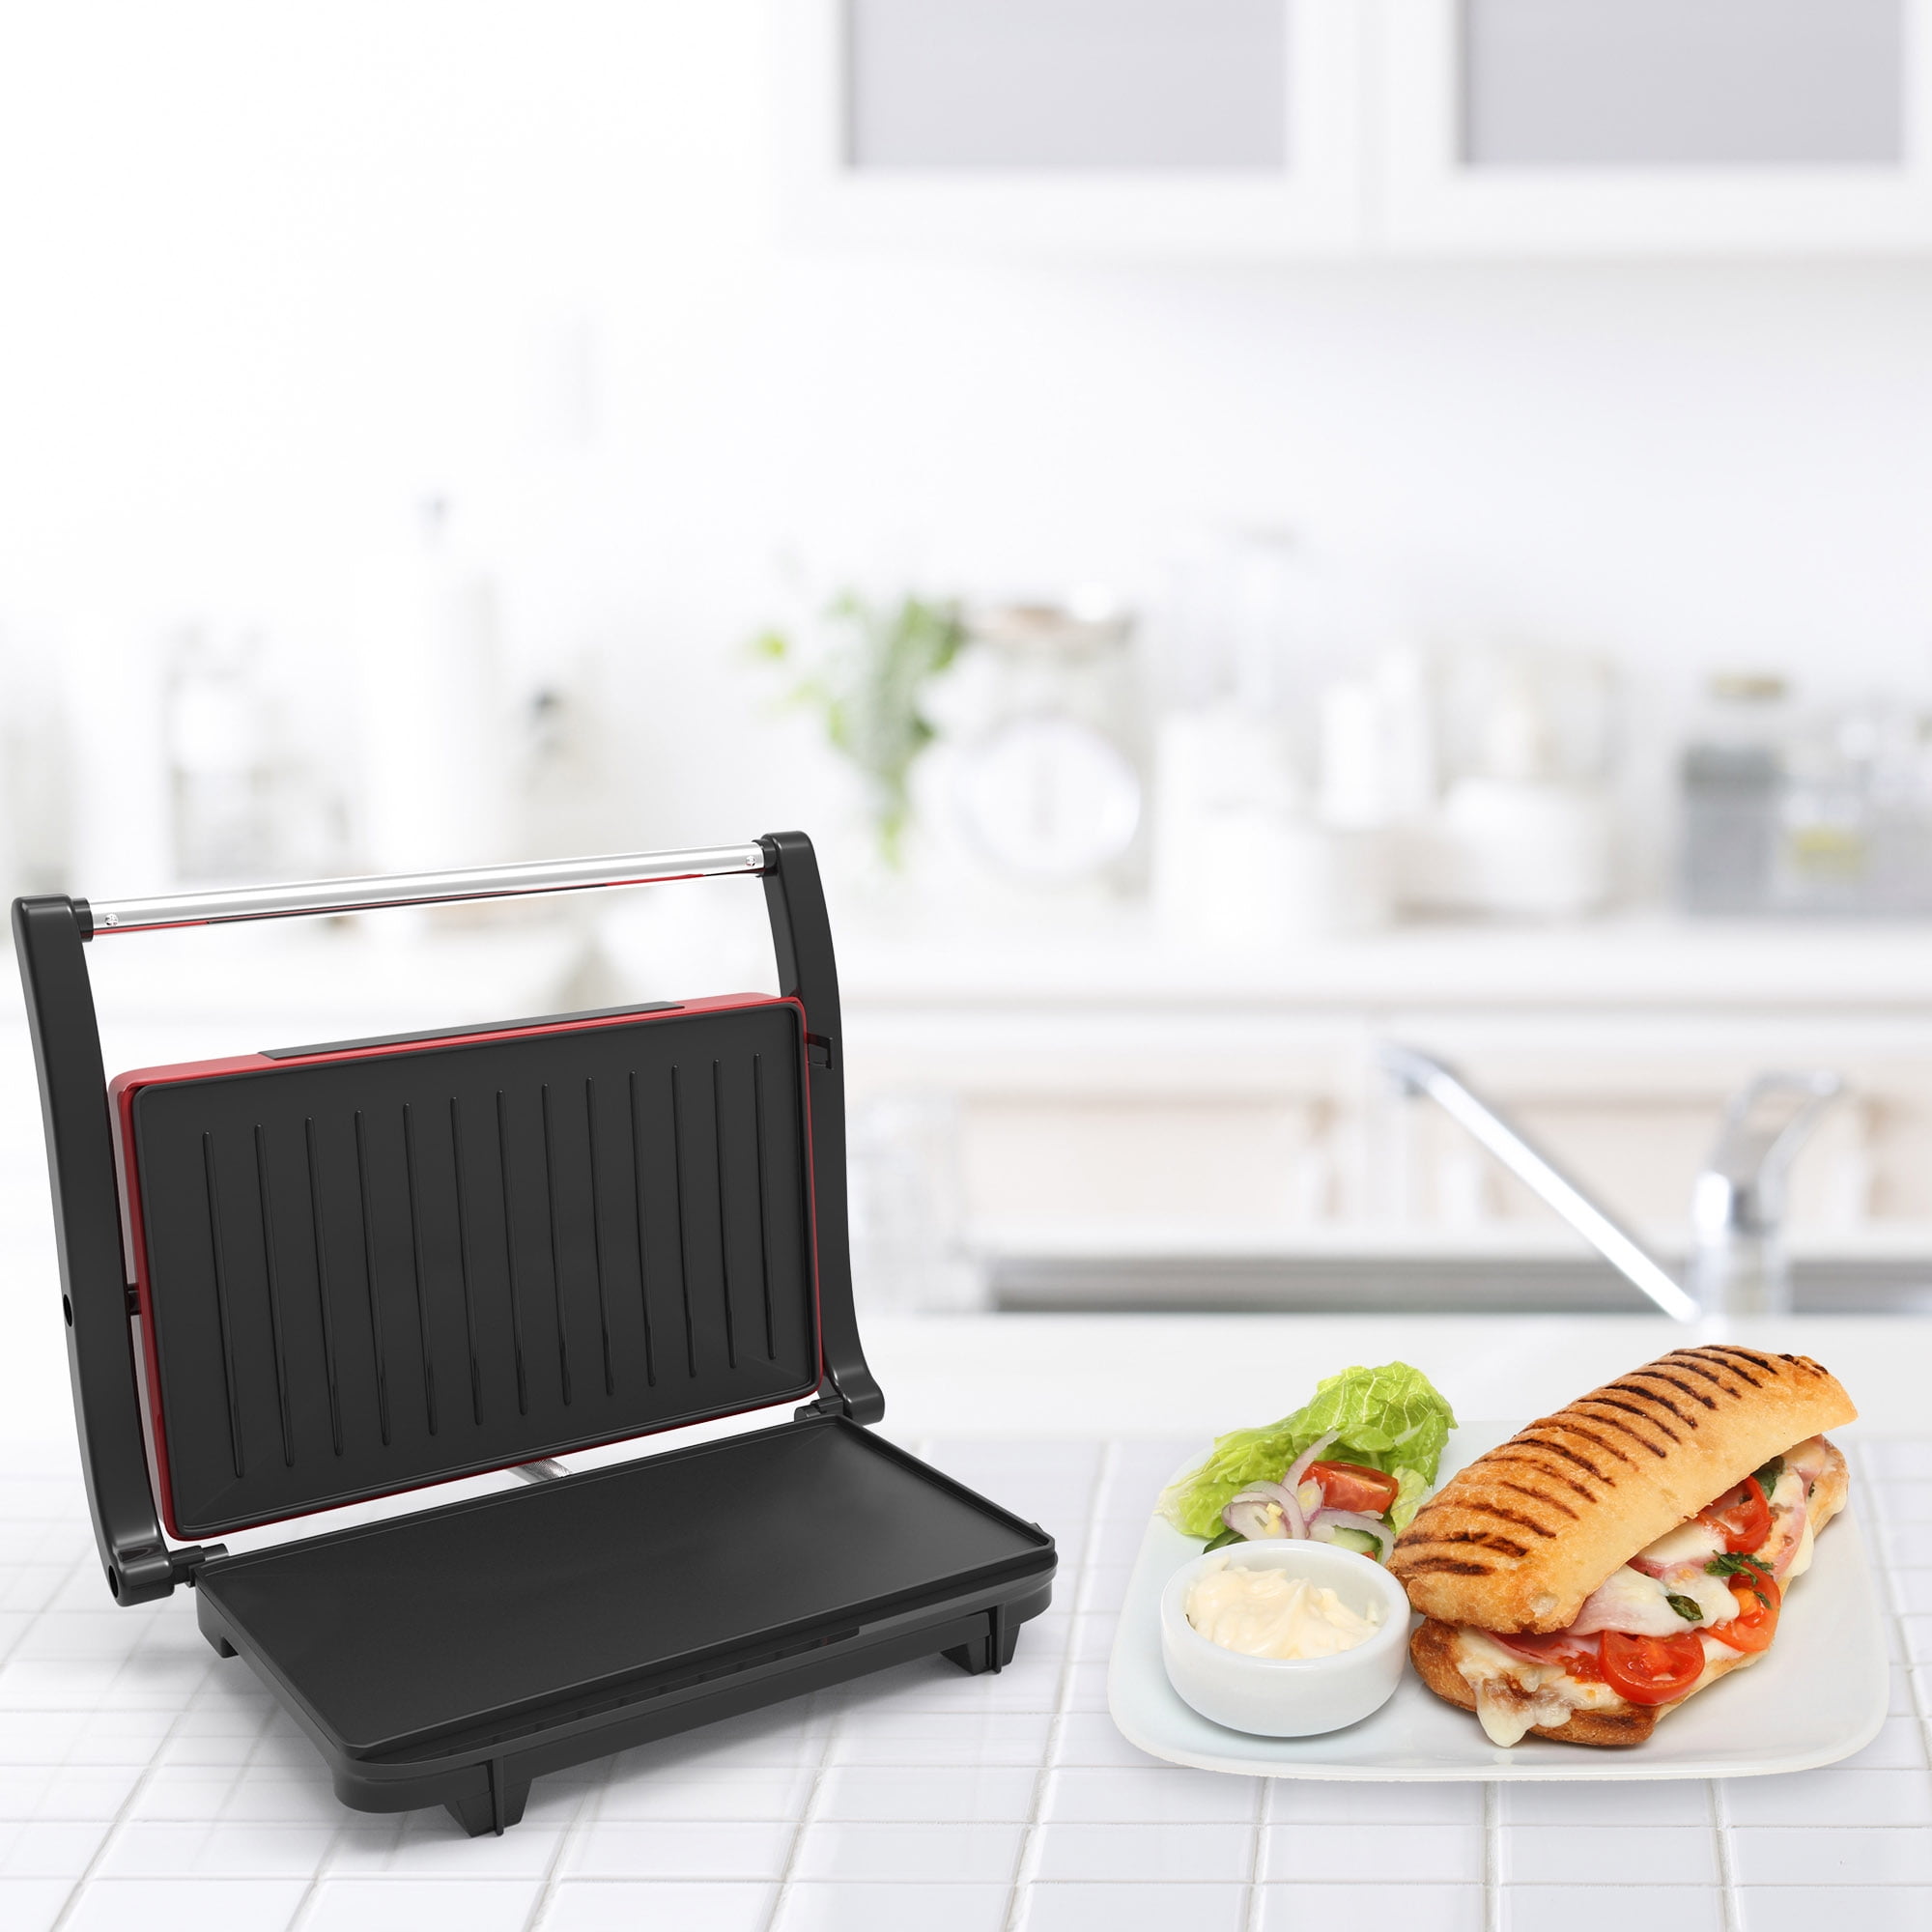 Chef Buddy Chef Buddy 12.5 in. Non-Stick Grill Pan, Wayfair